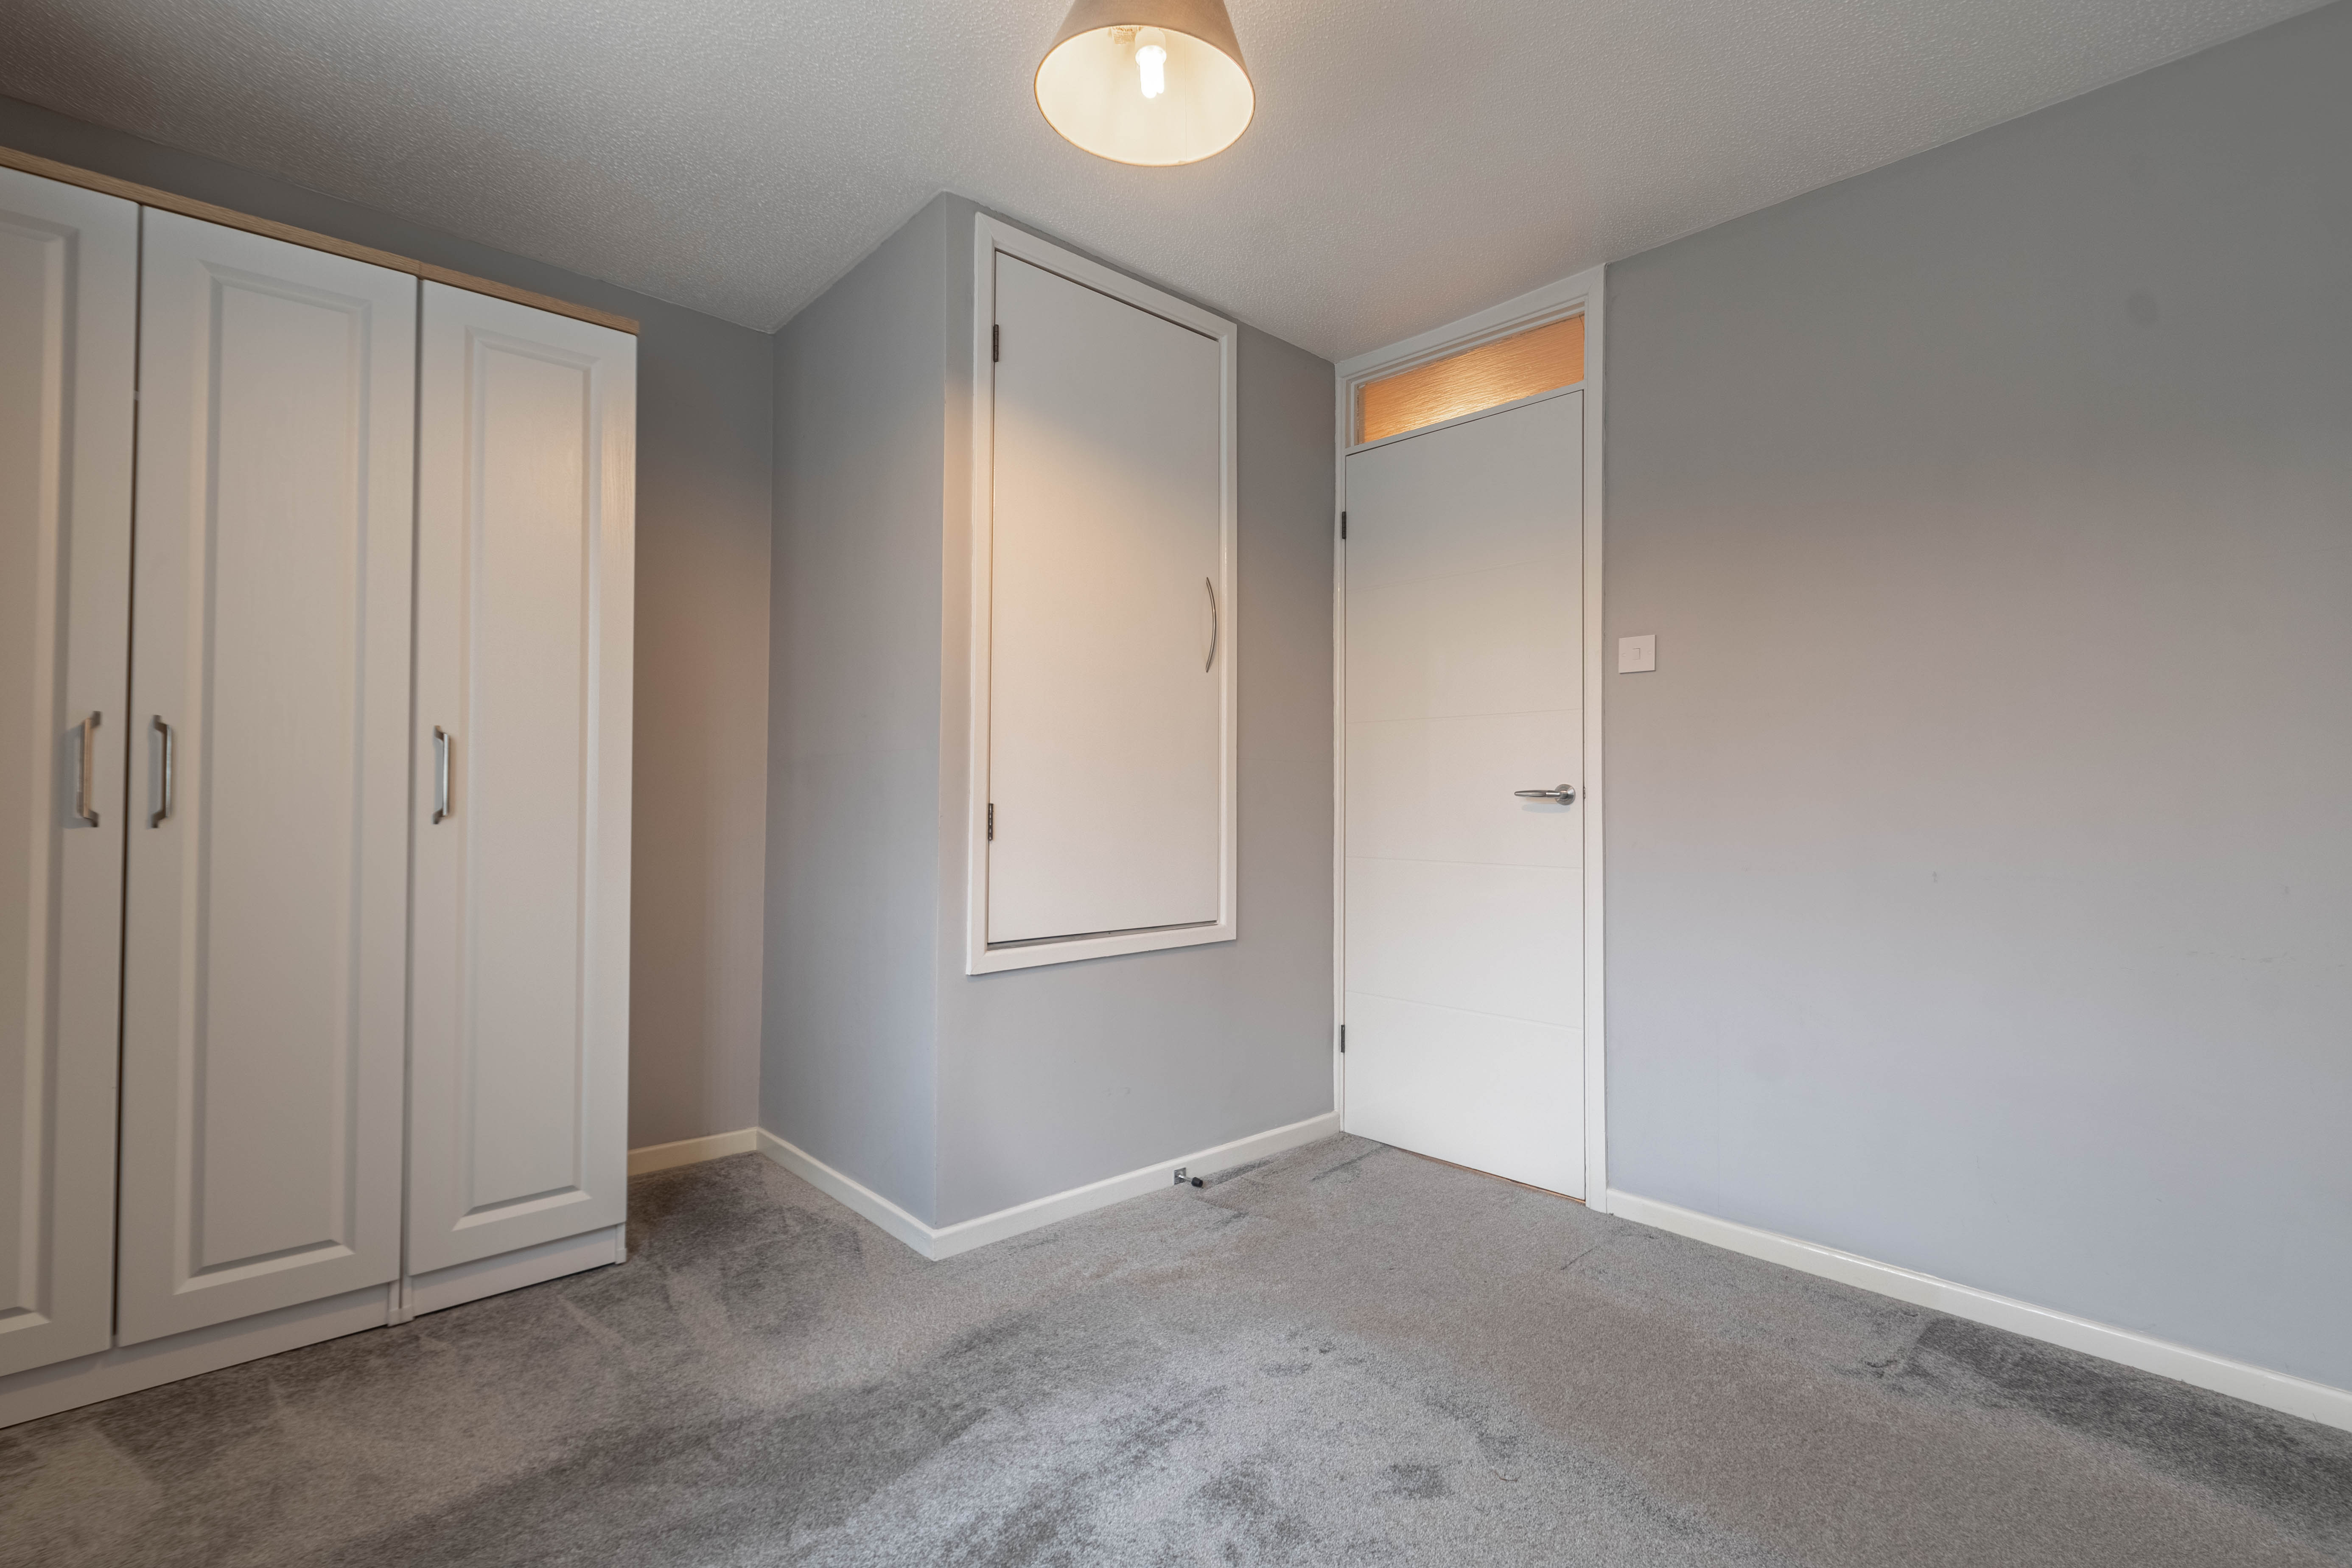 2 bed house for sale in Abbotswood Close, Winyates Green  - Property Image 9